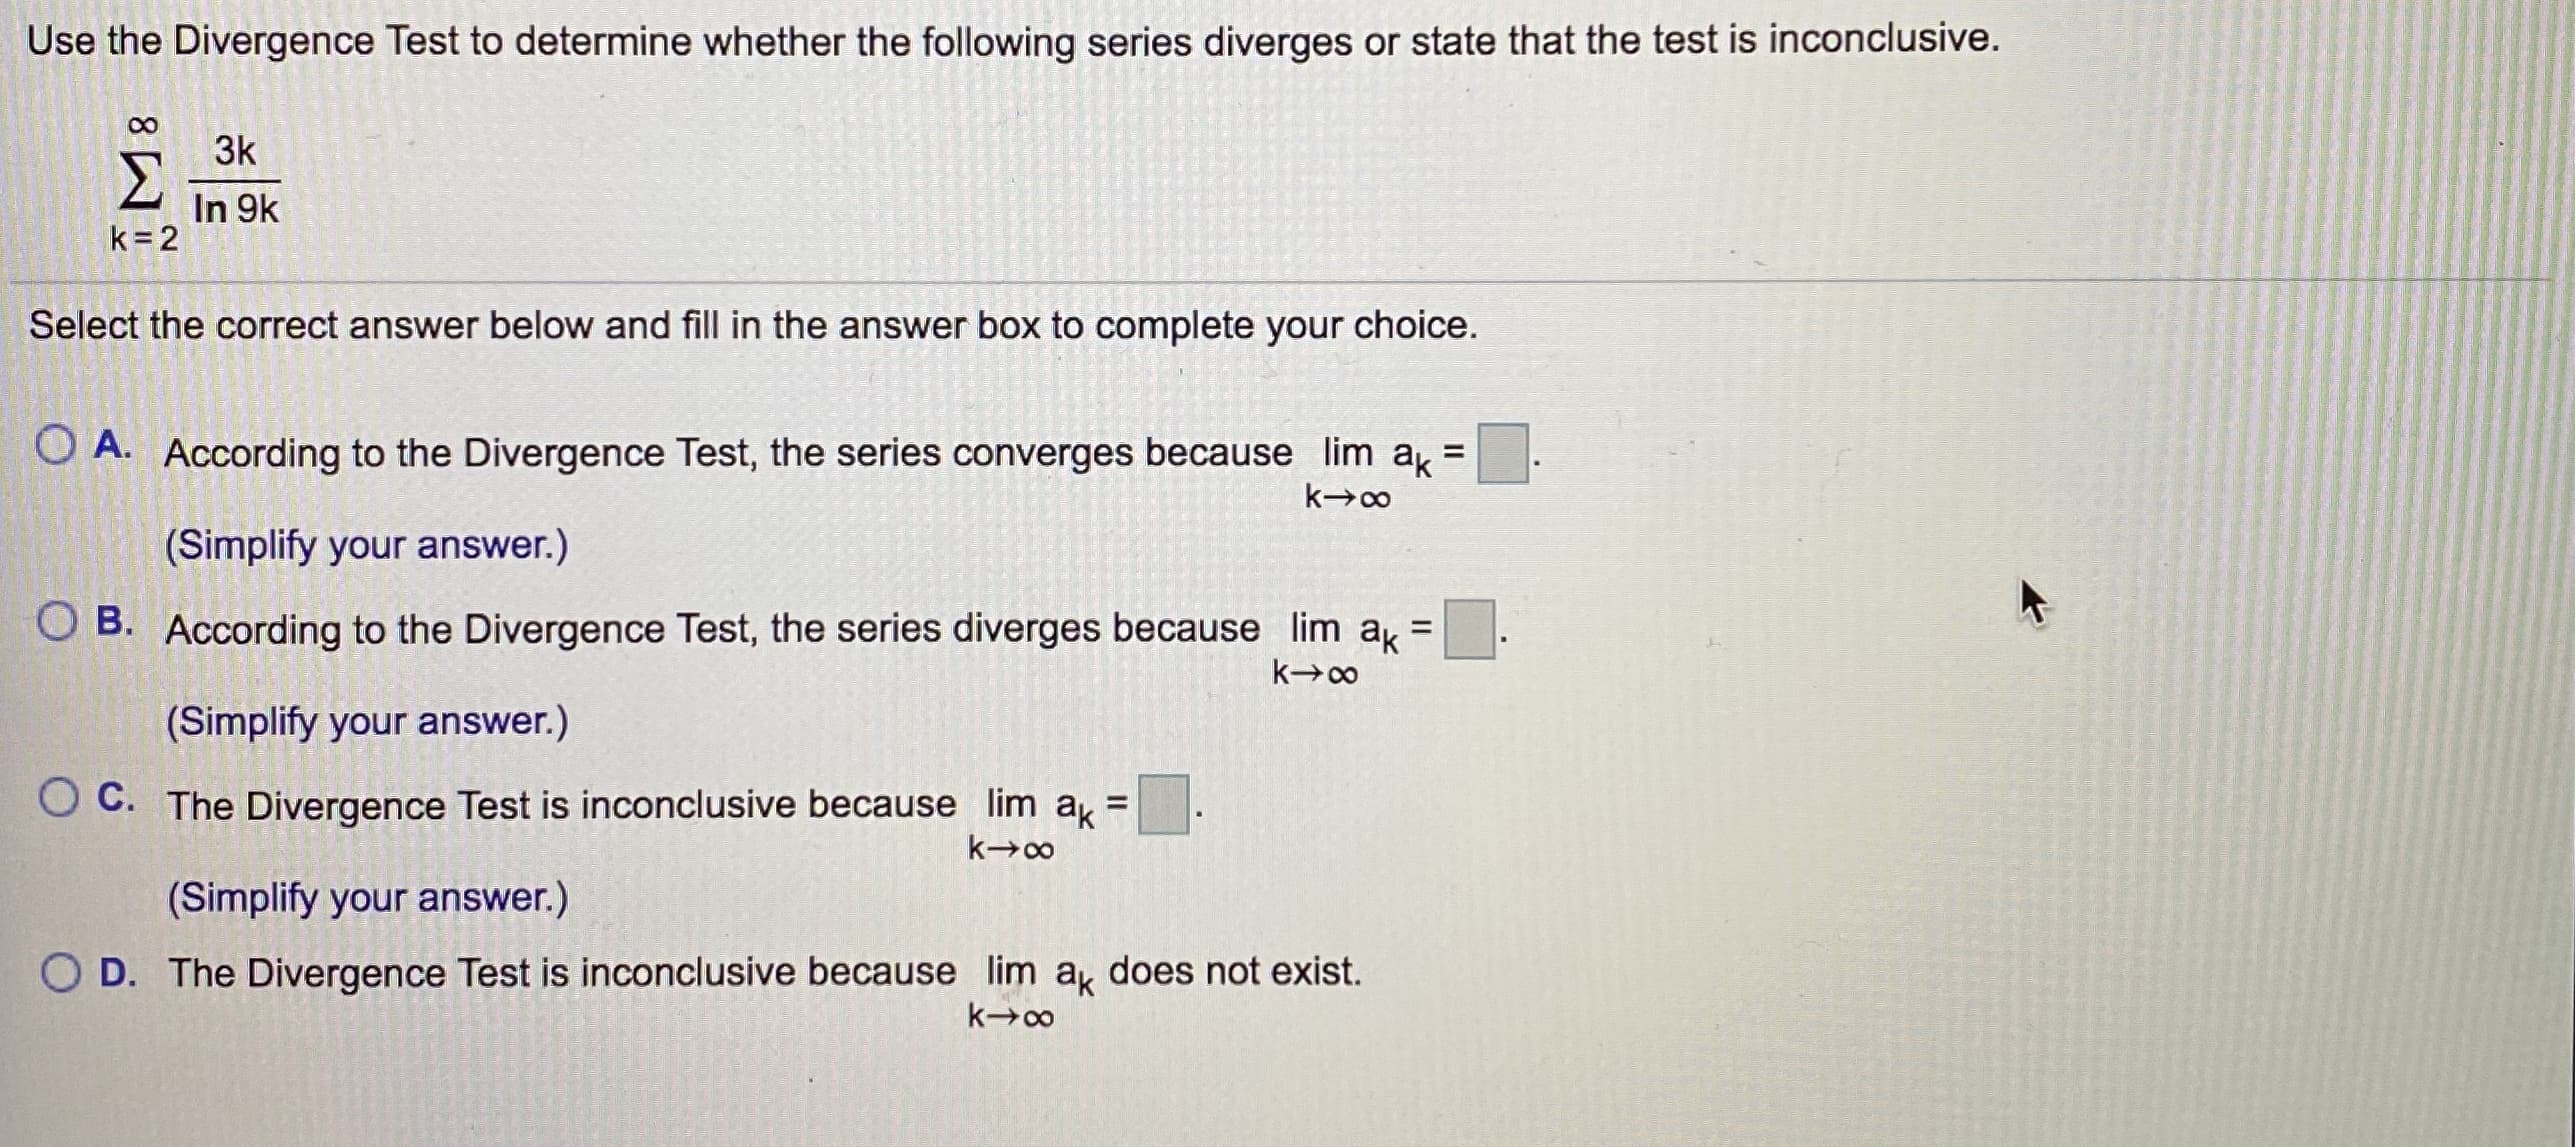 Use the Divergence Test to determine whether the following series diverges or state that the test is inconclusive.
3k
Σ
In 9k
k= 2
Select the correct answer below and fill in the answer box to complete your choice.
O A. According to the Divergence Test, the series converges because lim a =
(Simplify your answer.)
O B. According to the Divergence Test, the series diverges because lim a =:
(Simplify your answer.)
O C. The Divergence Test is inconclusive because lim a =
(Simplify your answer.)
O D. The Divergence Test is inconclusive because lim a does not exist.
